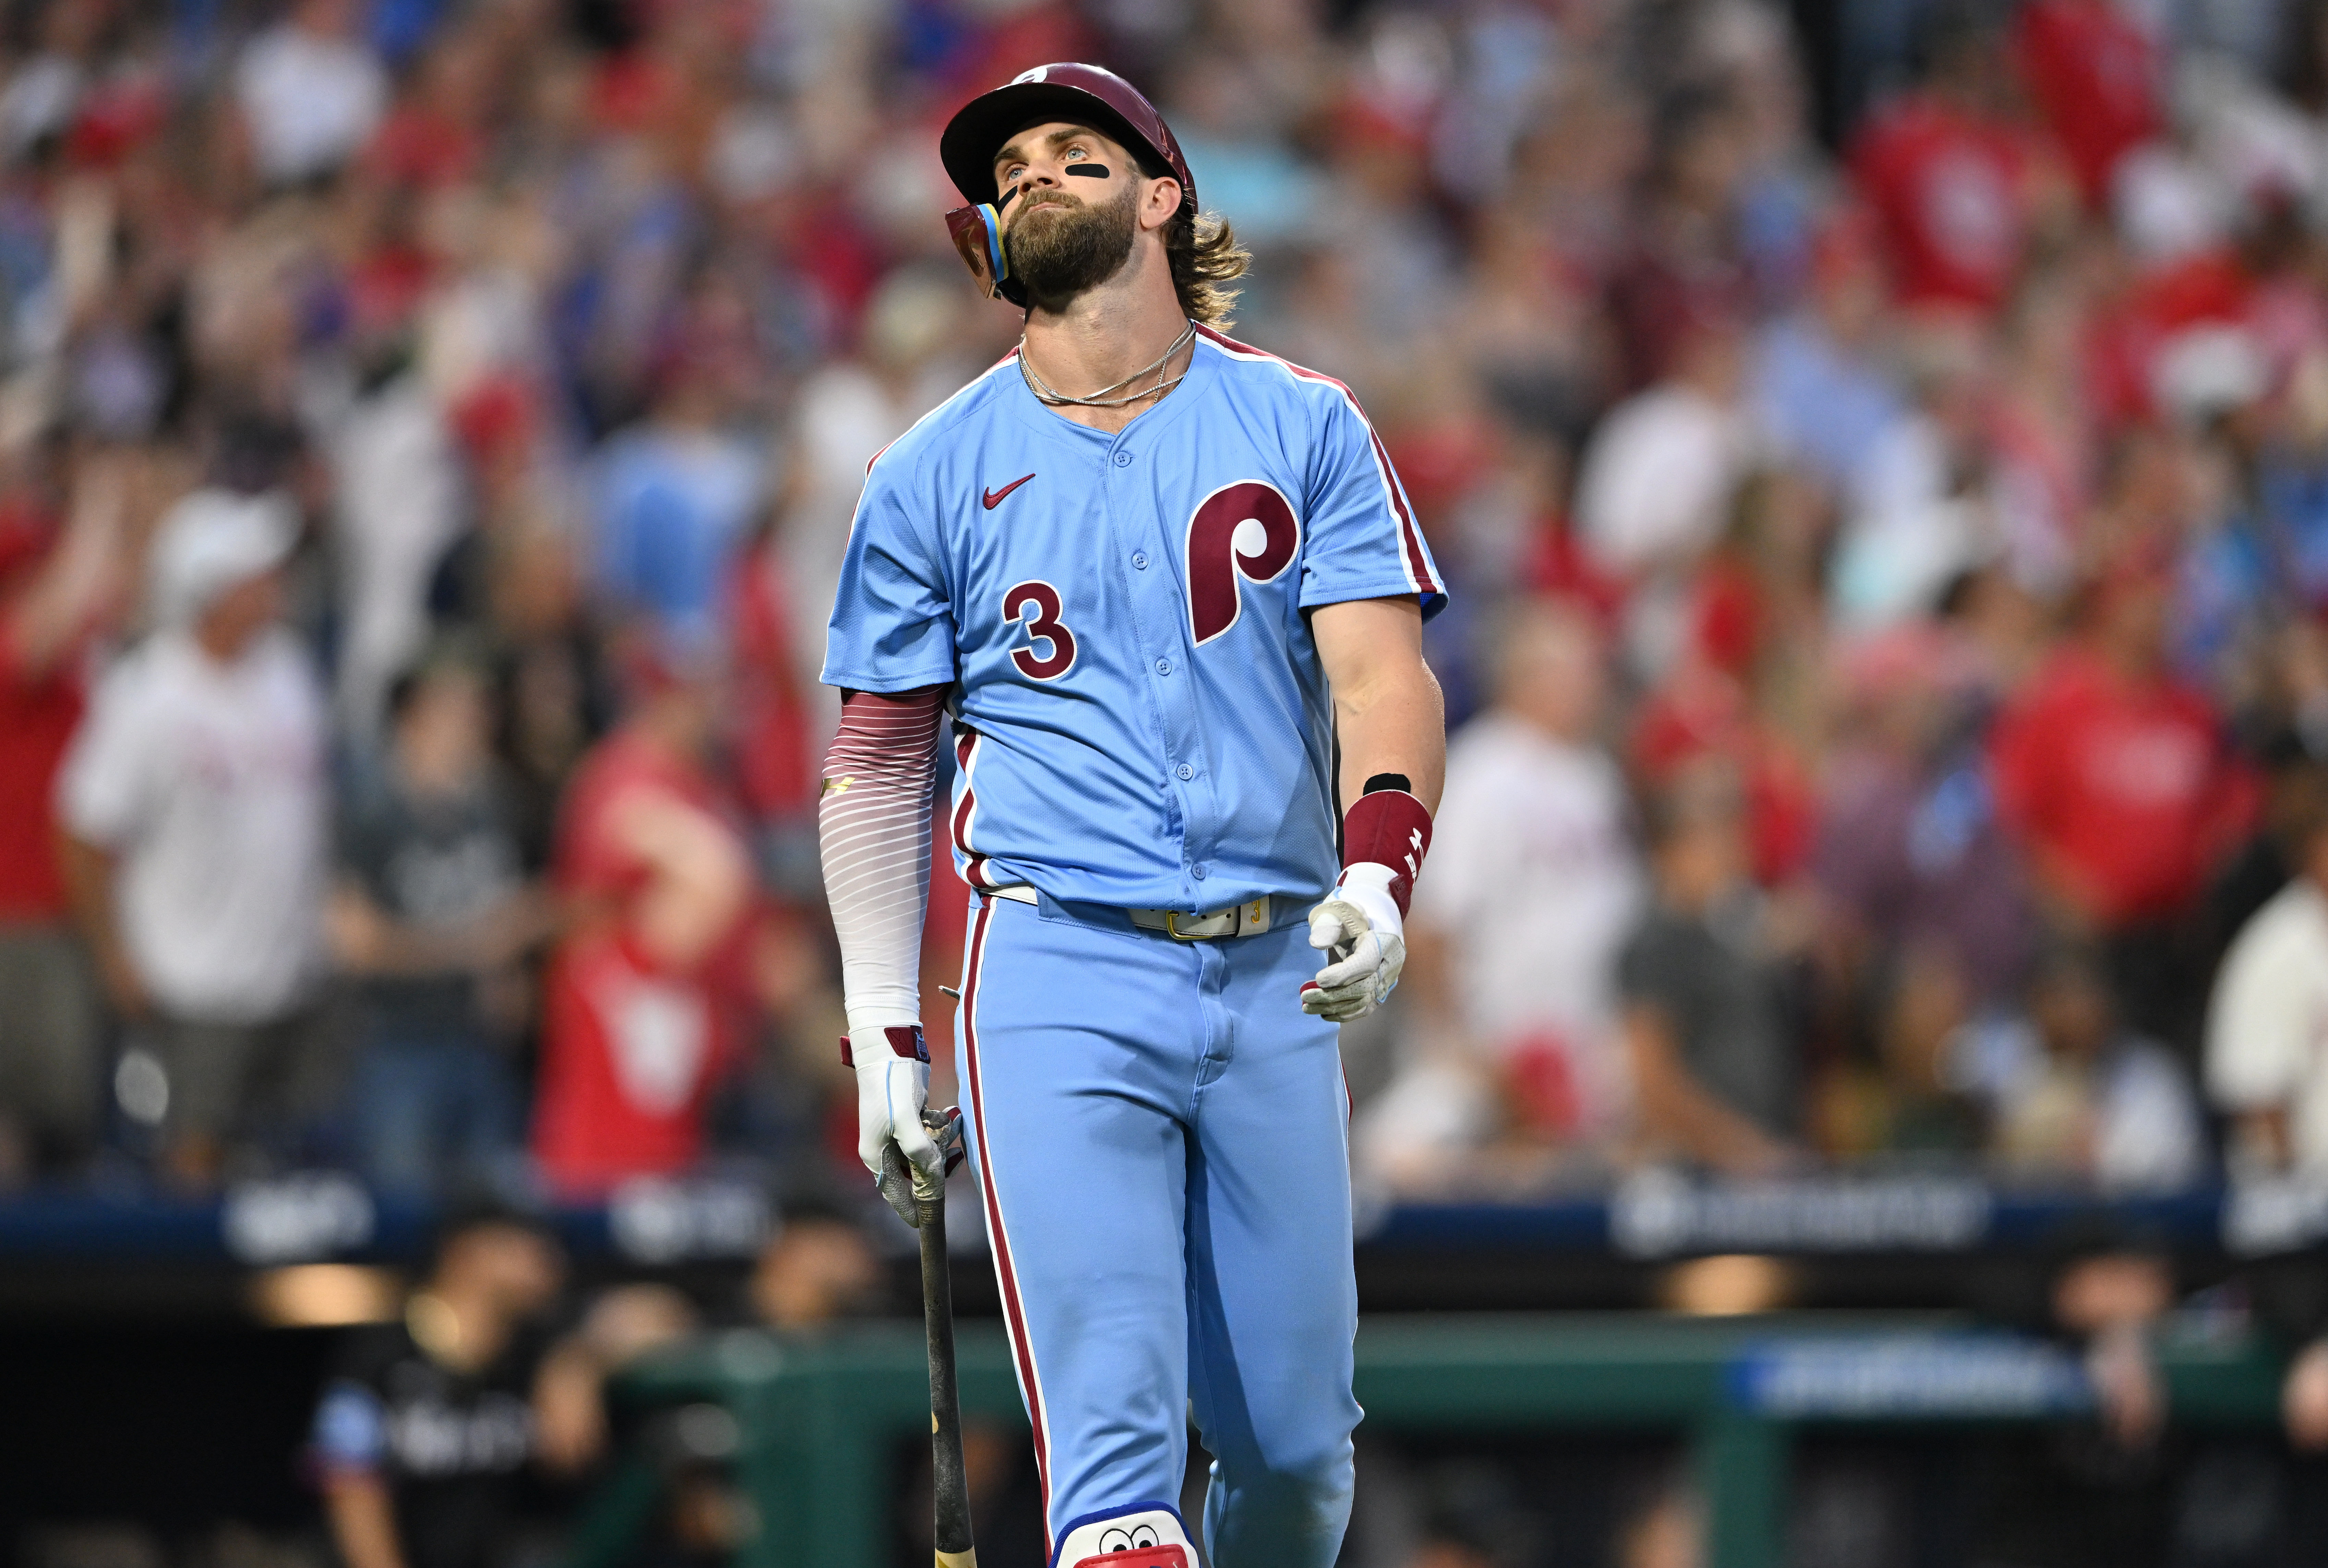 Bryce Harper suffered a hamstring injury (Photo Credit: IMAGN)